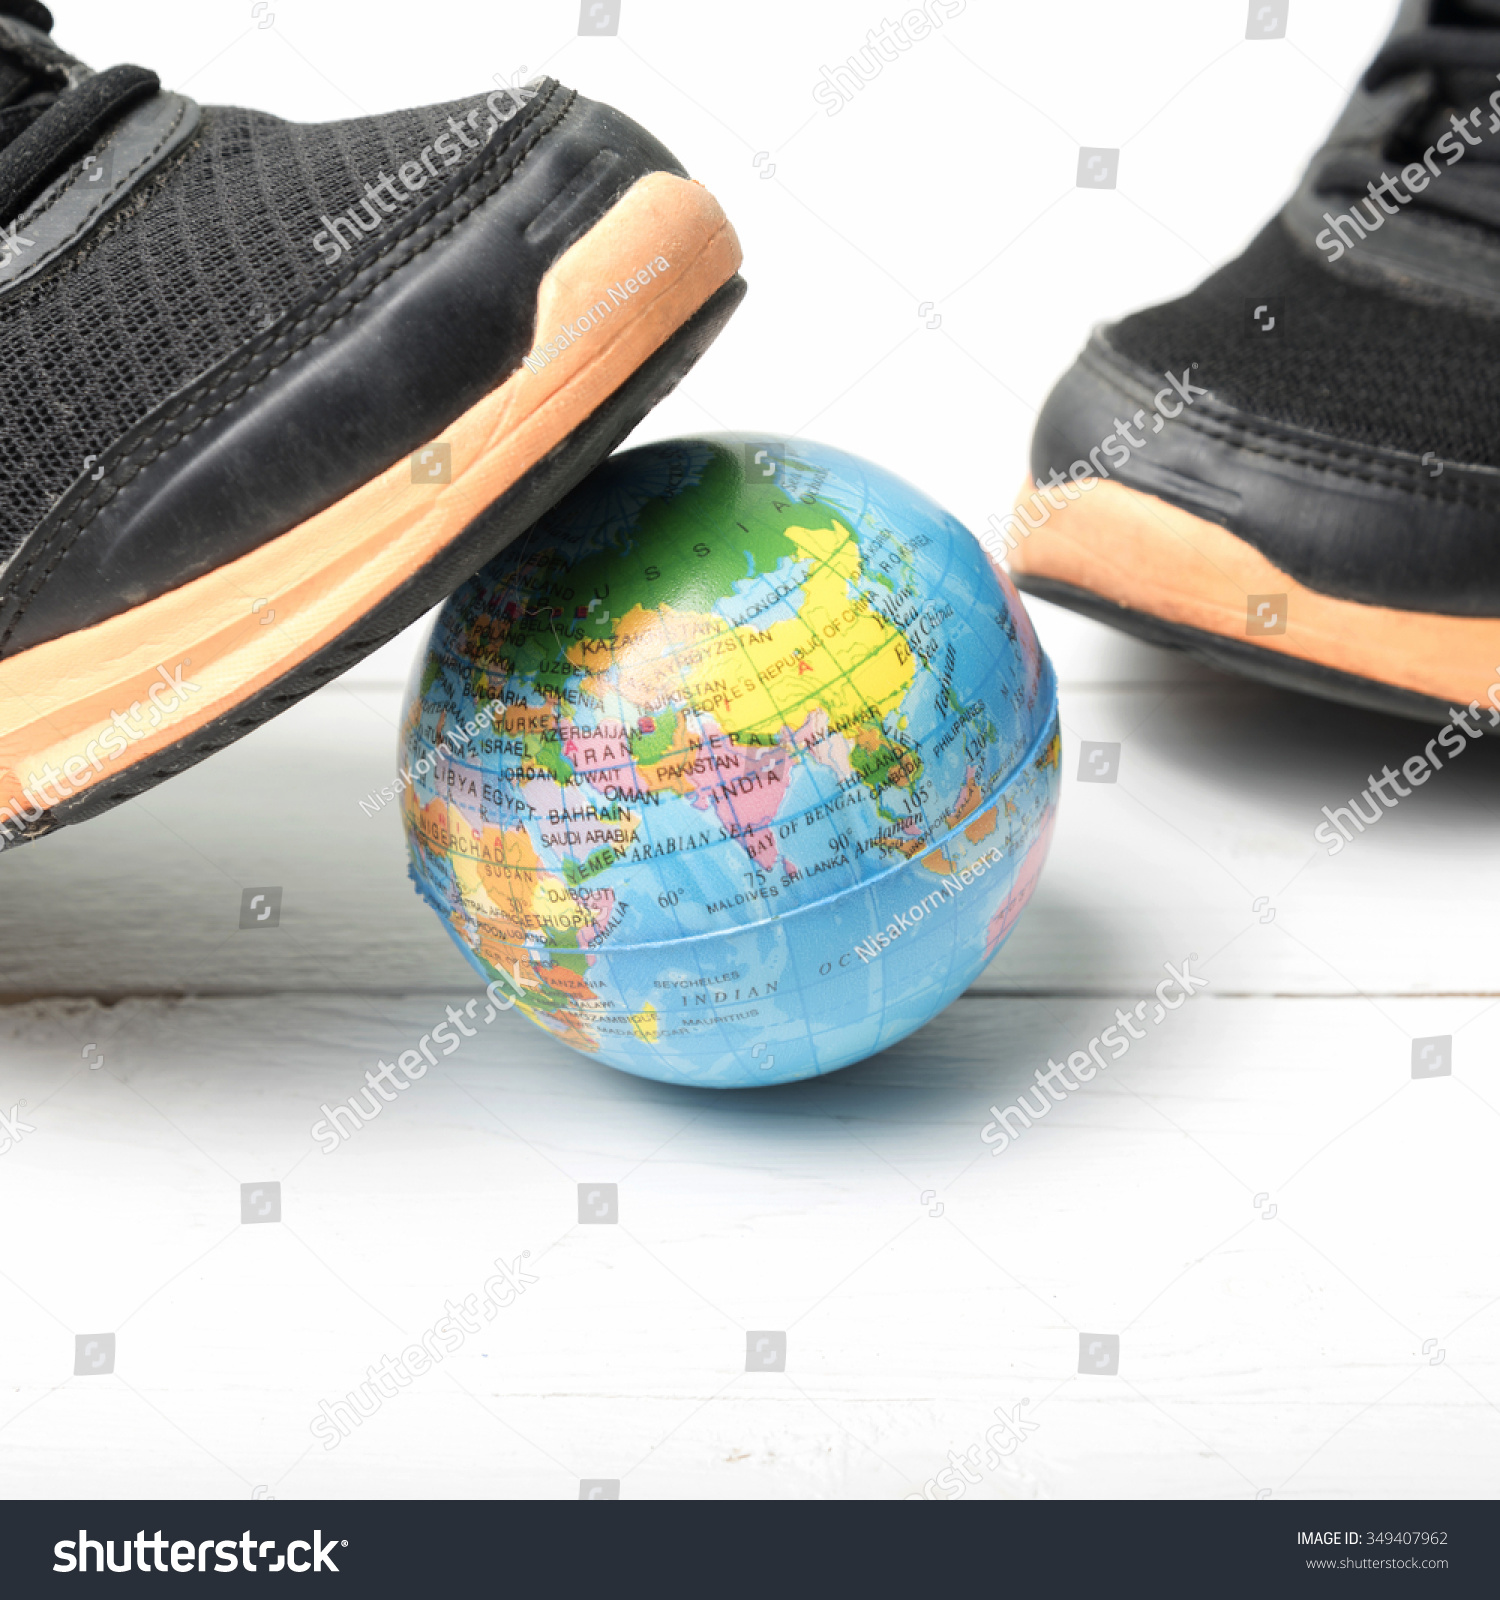 the bay planet earth shoes